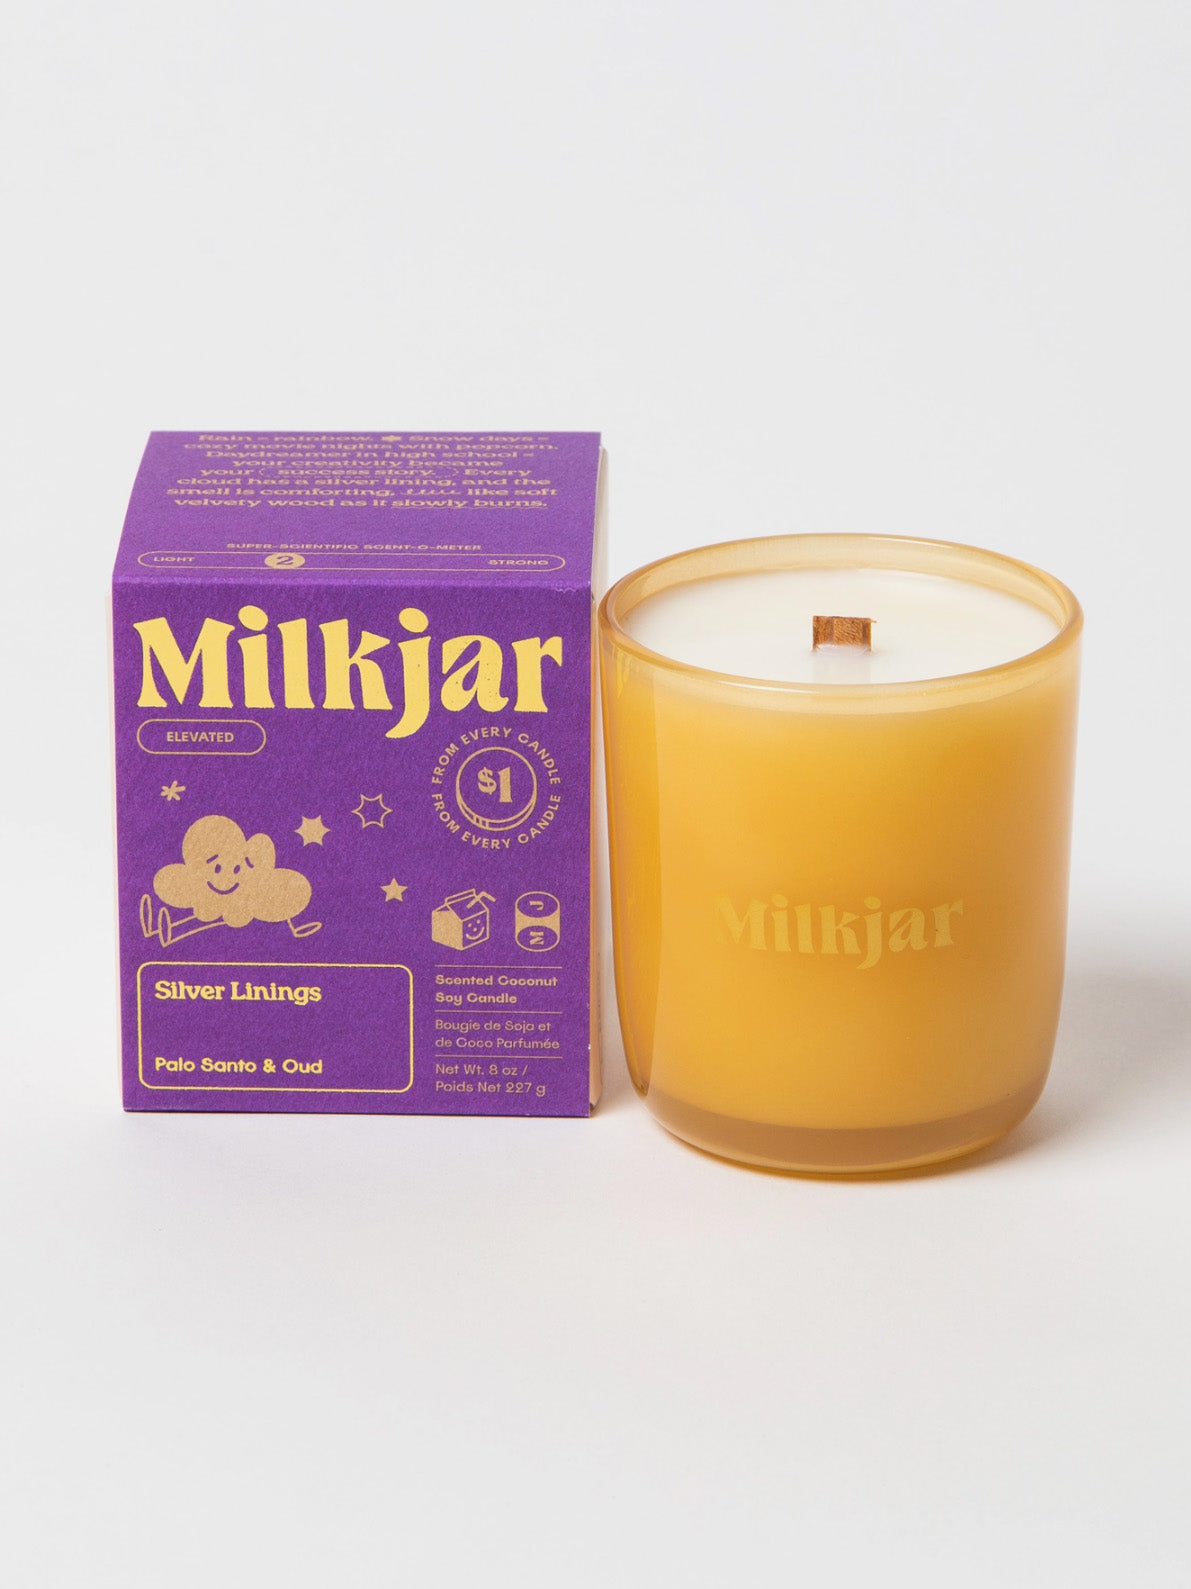 silver linings candle